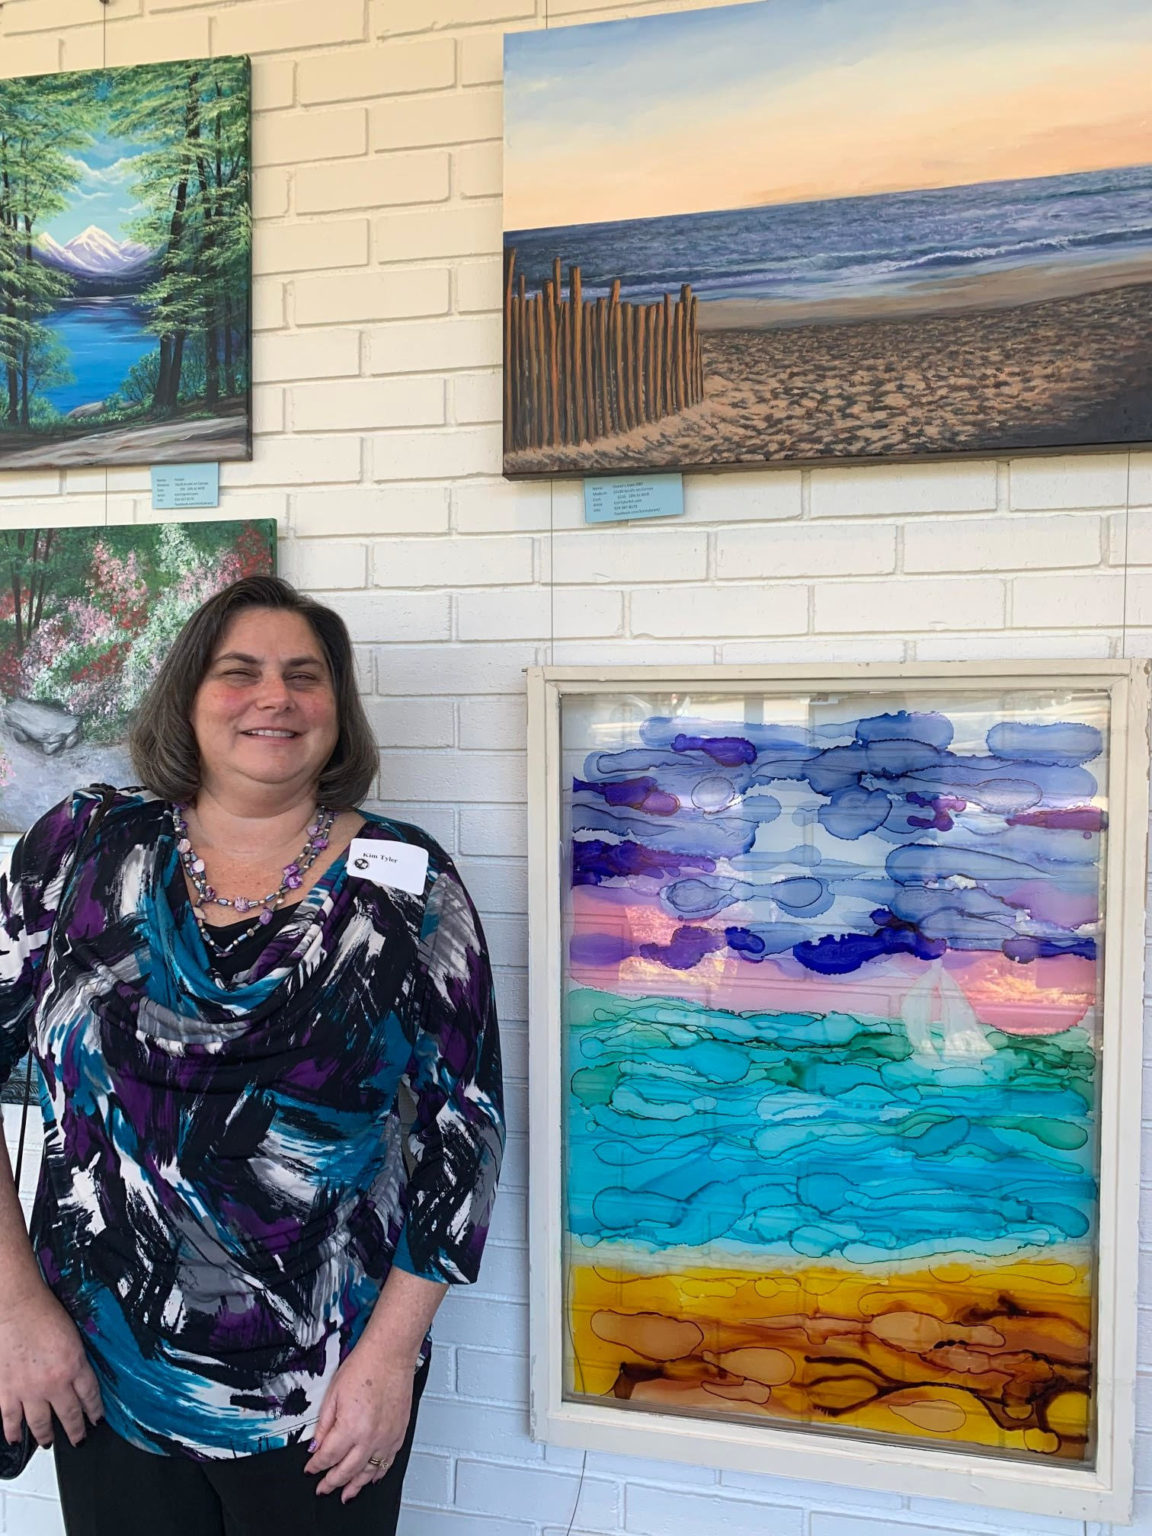 Kim Tyler stands next to a large abstracted landscape ink painting on a windowpane. Kim is a white woman with shoulder length black hair wearing a blue and purple blouse. Also in view are Kim's acrylic landscape paintings on canvas - a sandy path to the beach and a lake surrounded by trees and mountains.